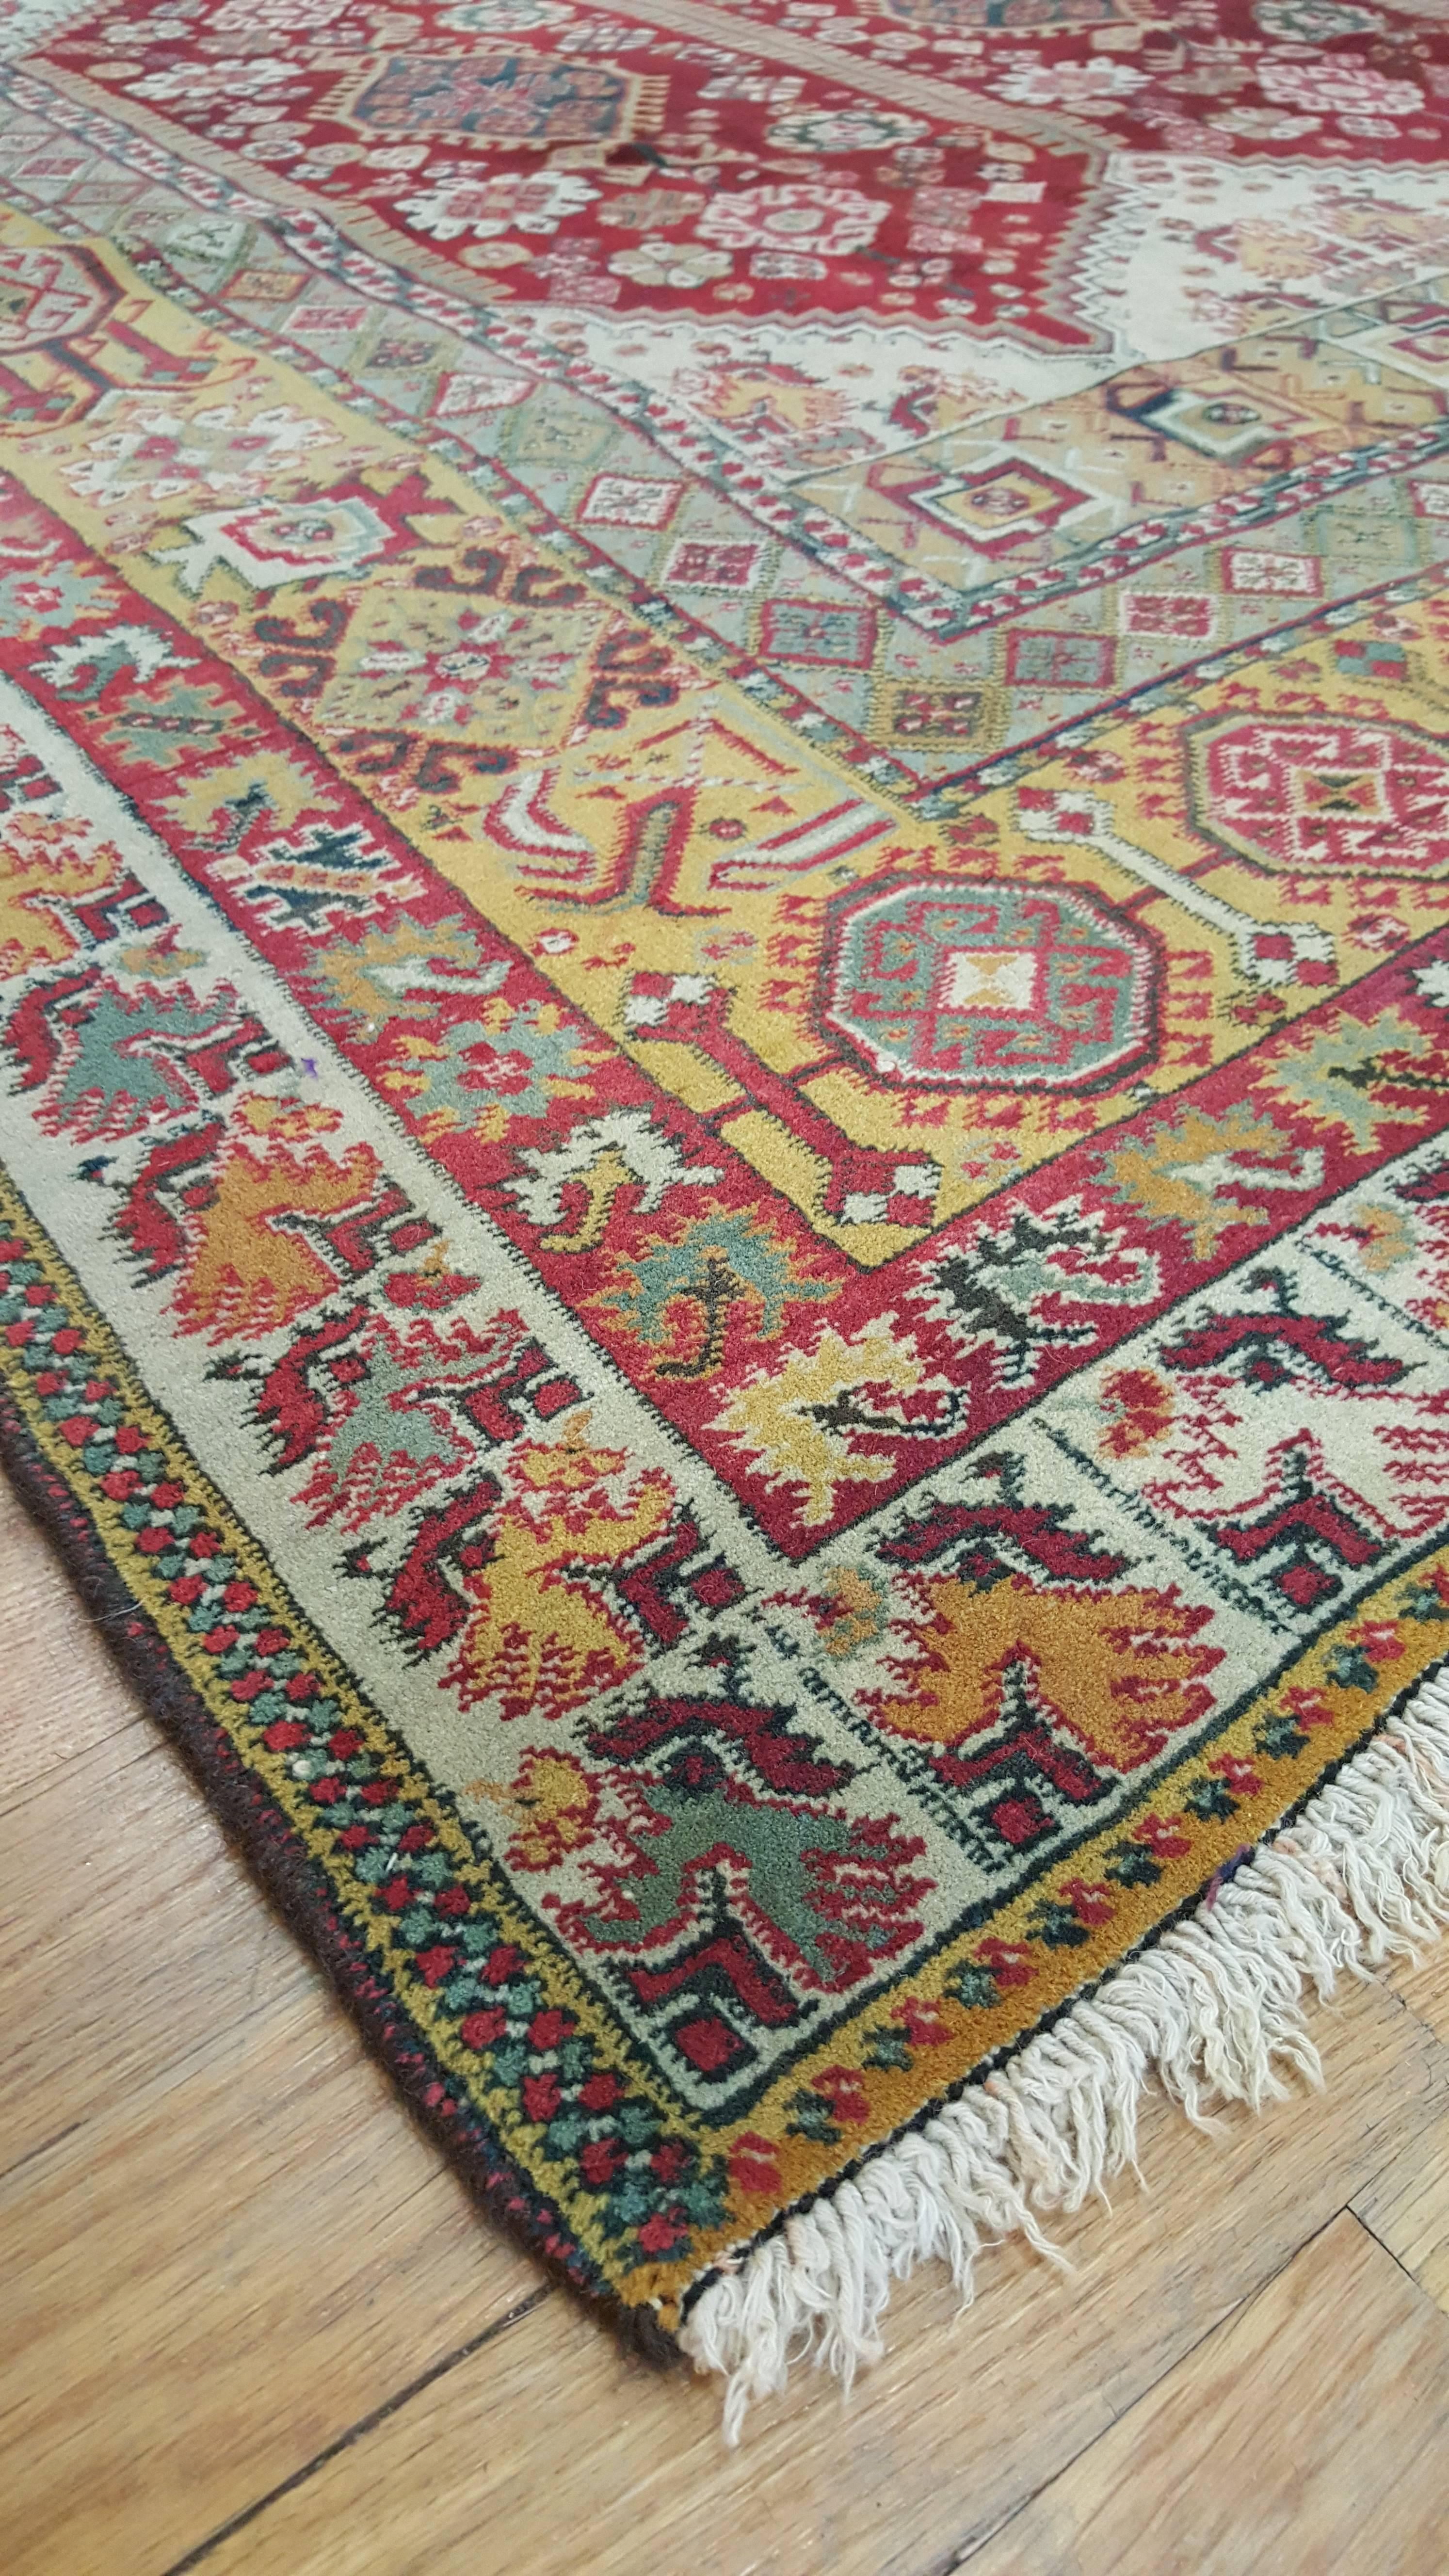 Antique Indian Agra Carpet, Indian Rugs, Oriental Rugs, Red, Gold, 5'10